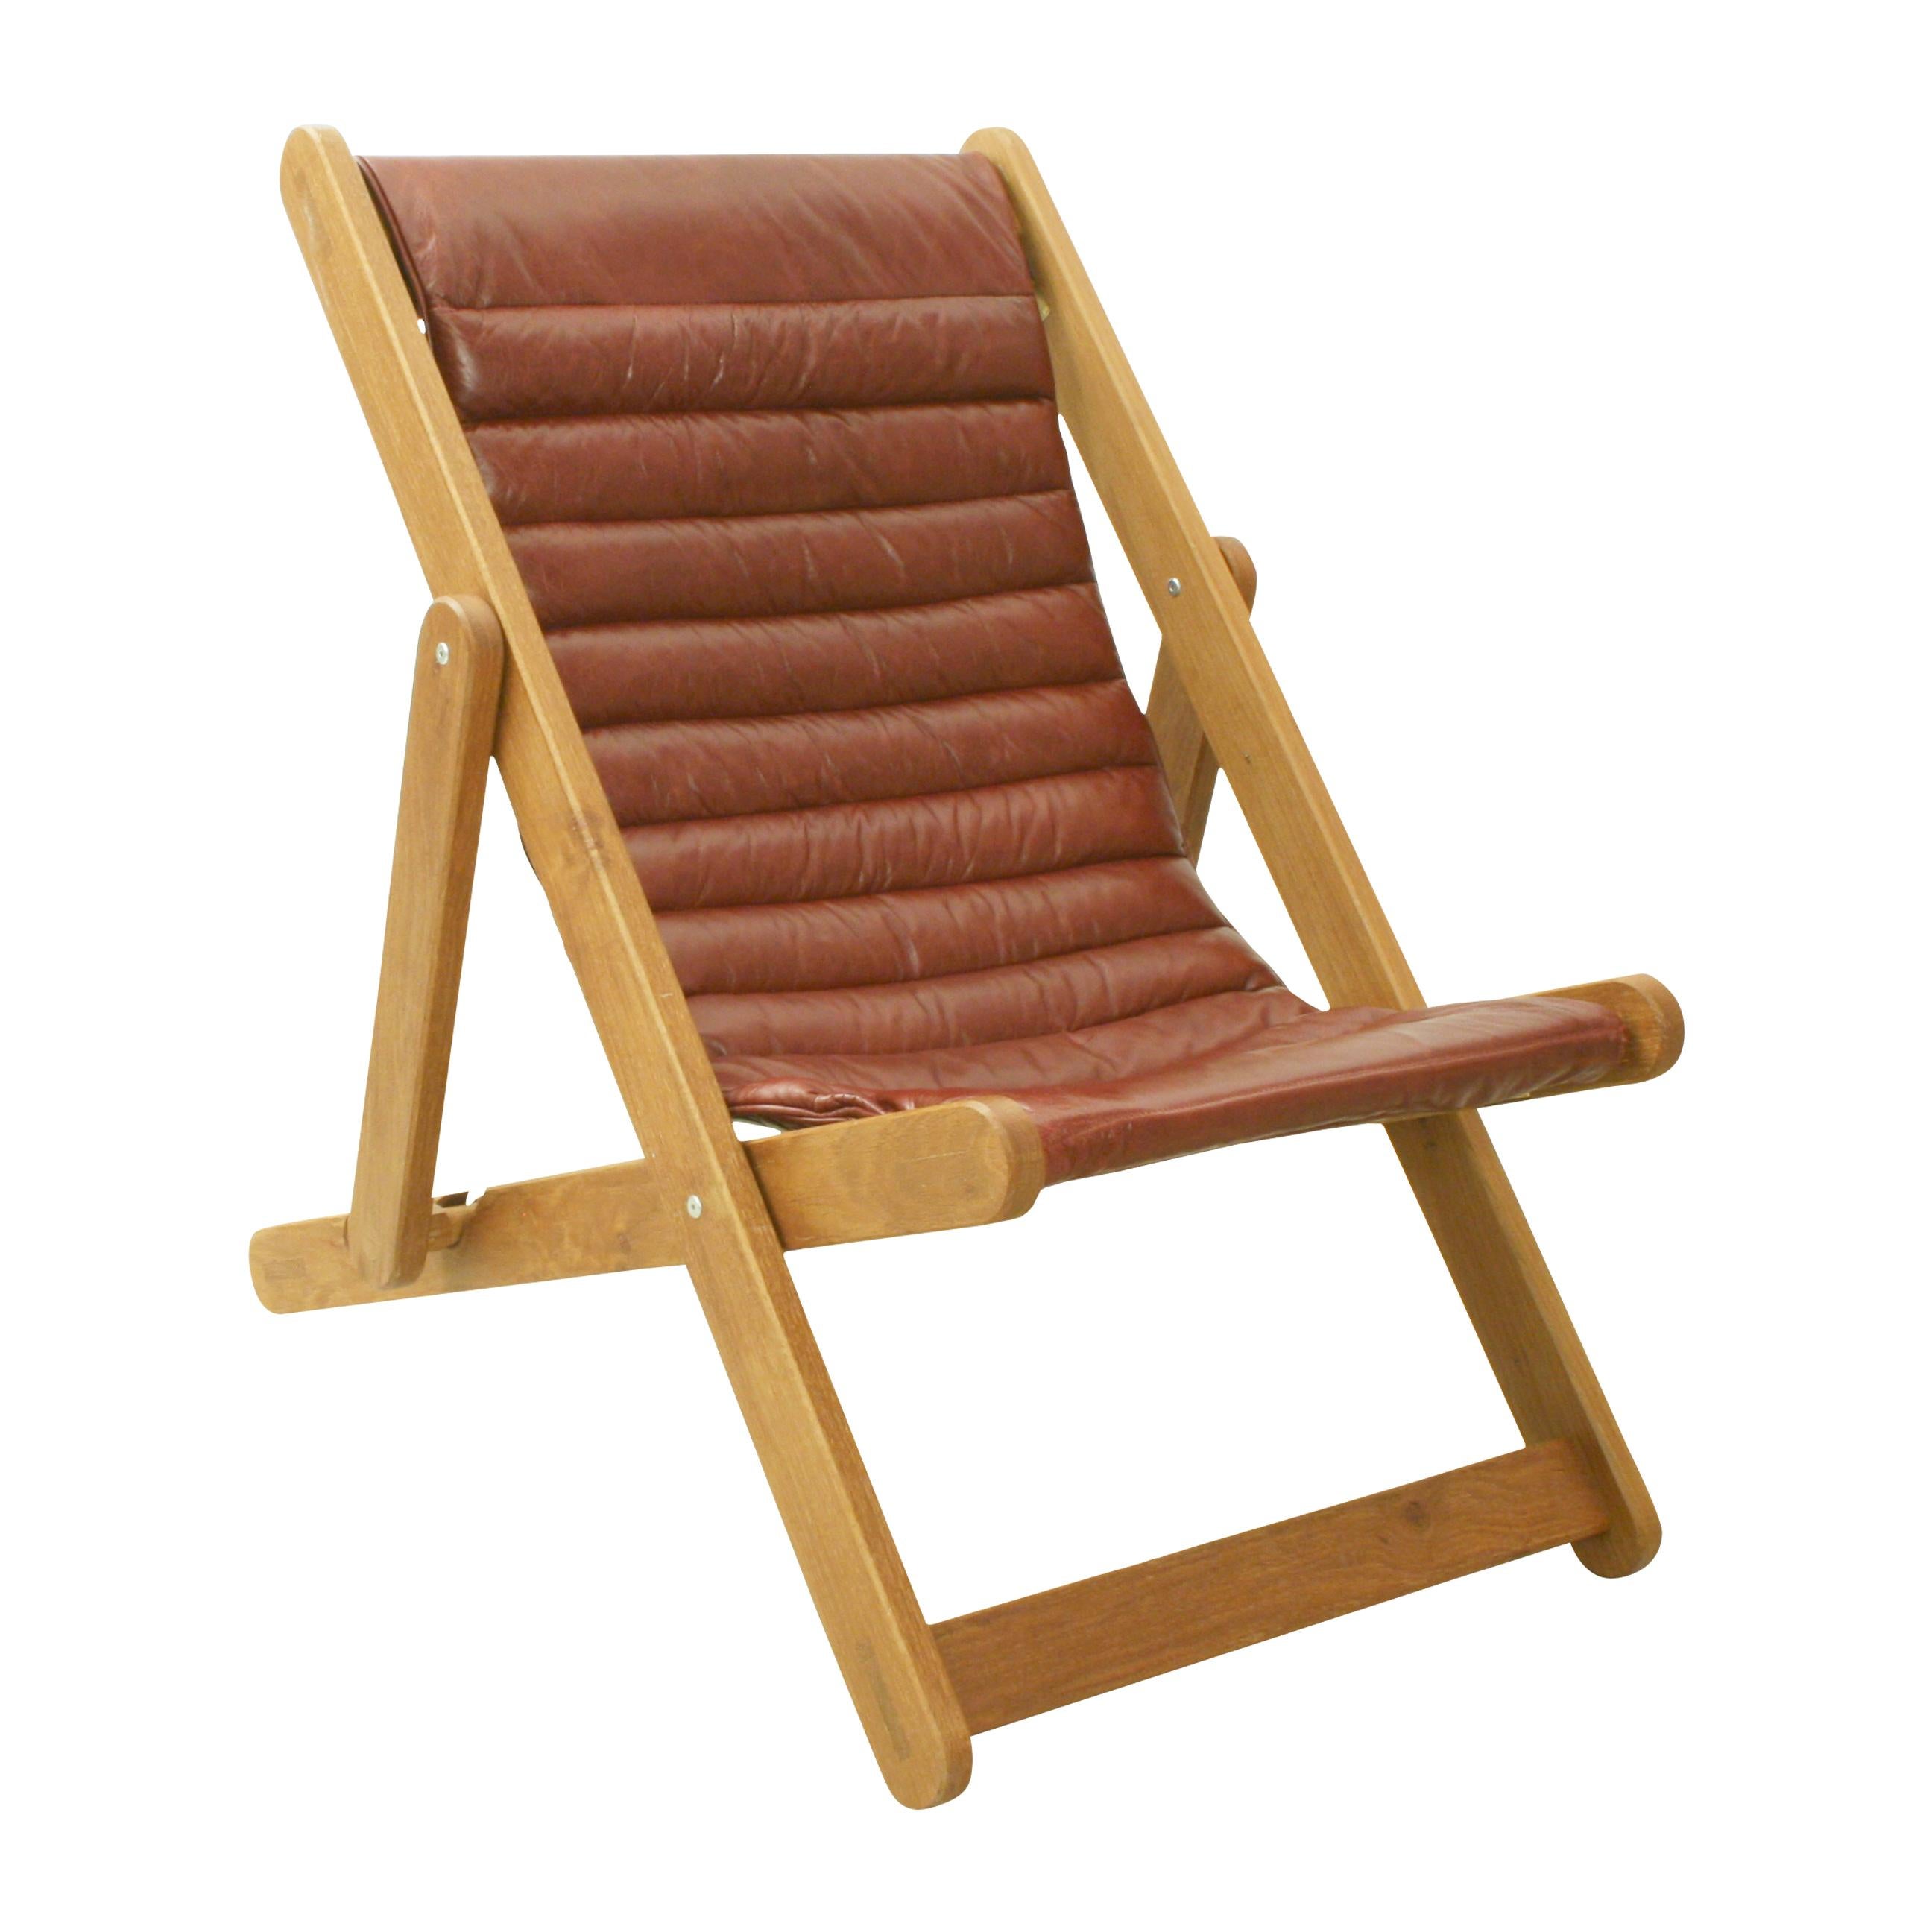 Modern Leather and Oak Deck Chair.
An extremely sturdy leather covered deck chair made with an oak frame. This is a heavy duty traditional design English deck chair with two seating positions. The chair is very comfortable as the red leather sling